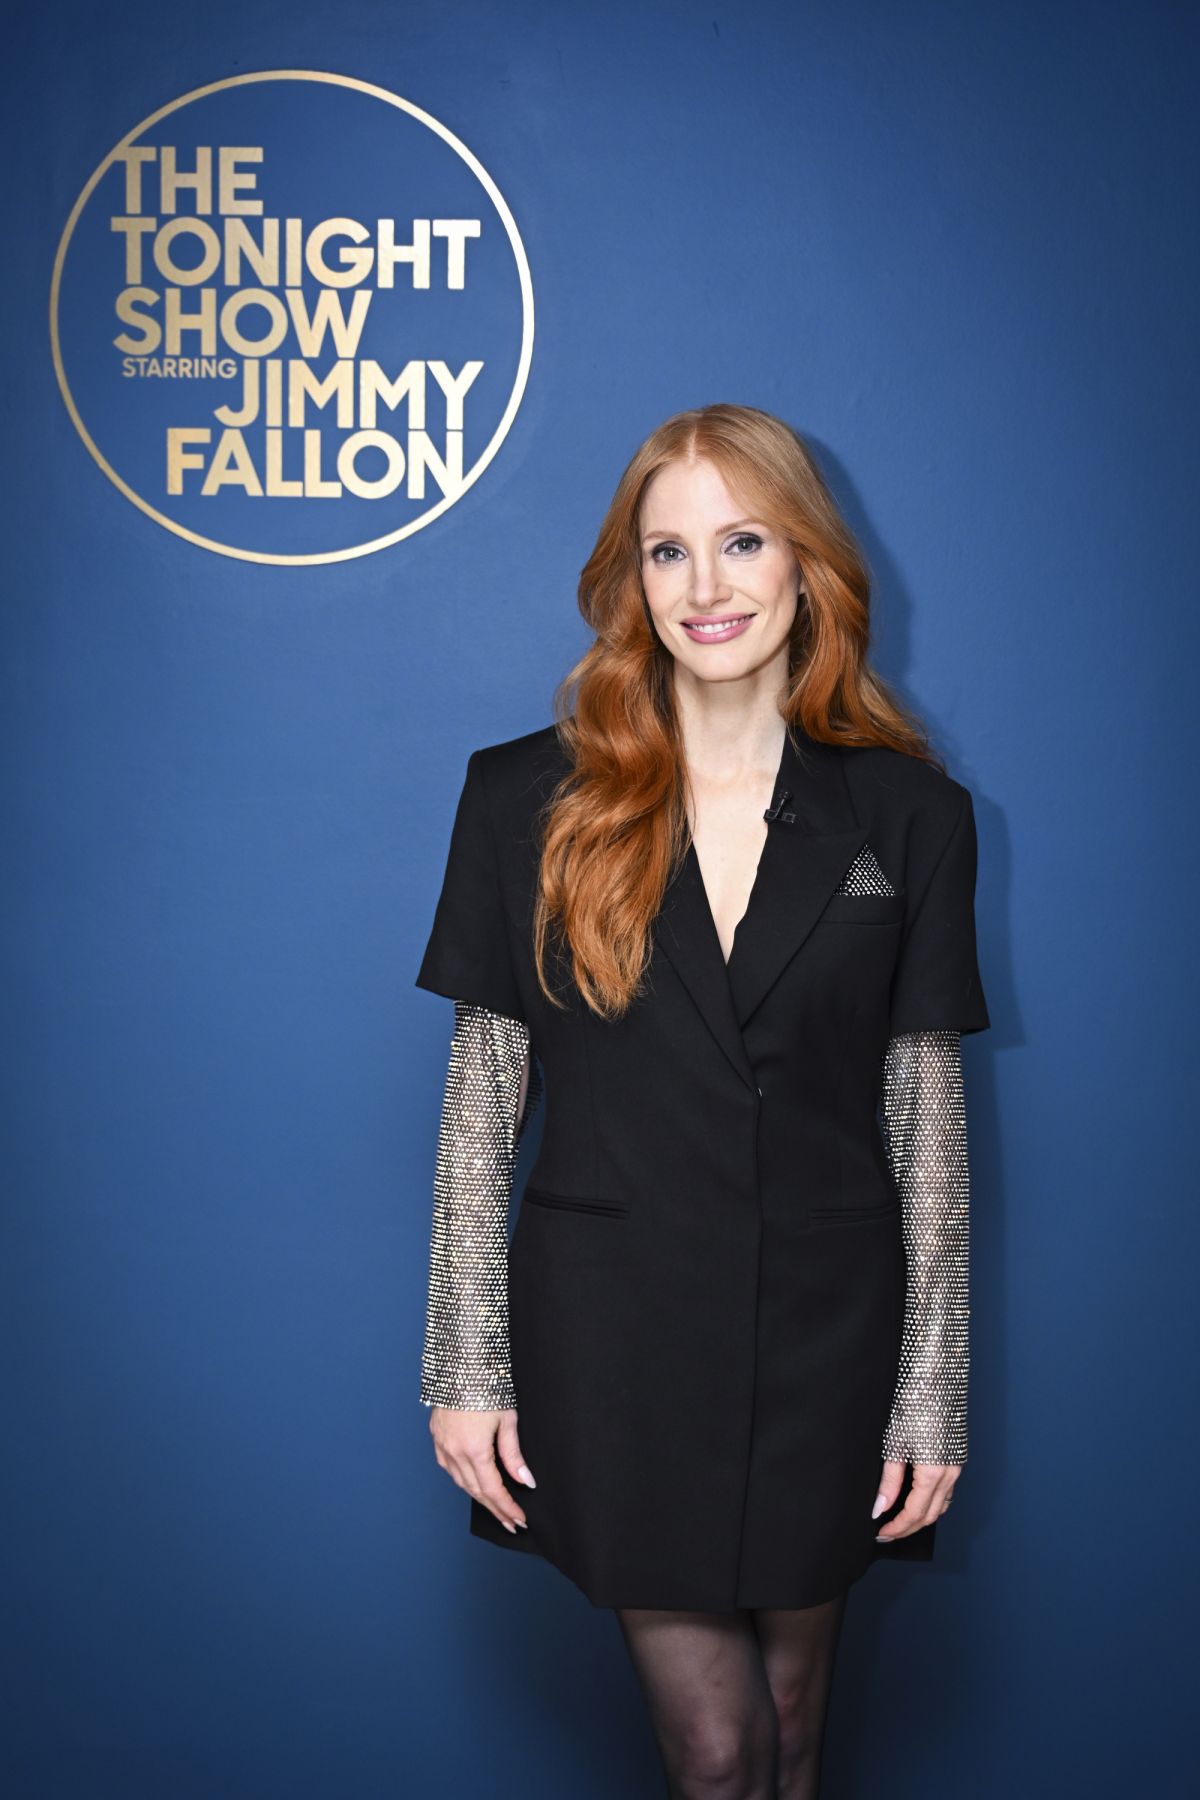 Jessica Chastain arrives on Tonight Show Starring Jimmy Fallon at NYC